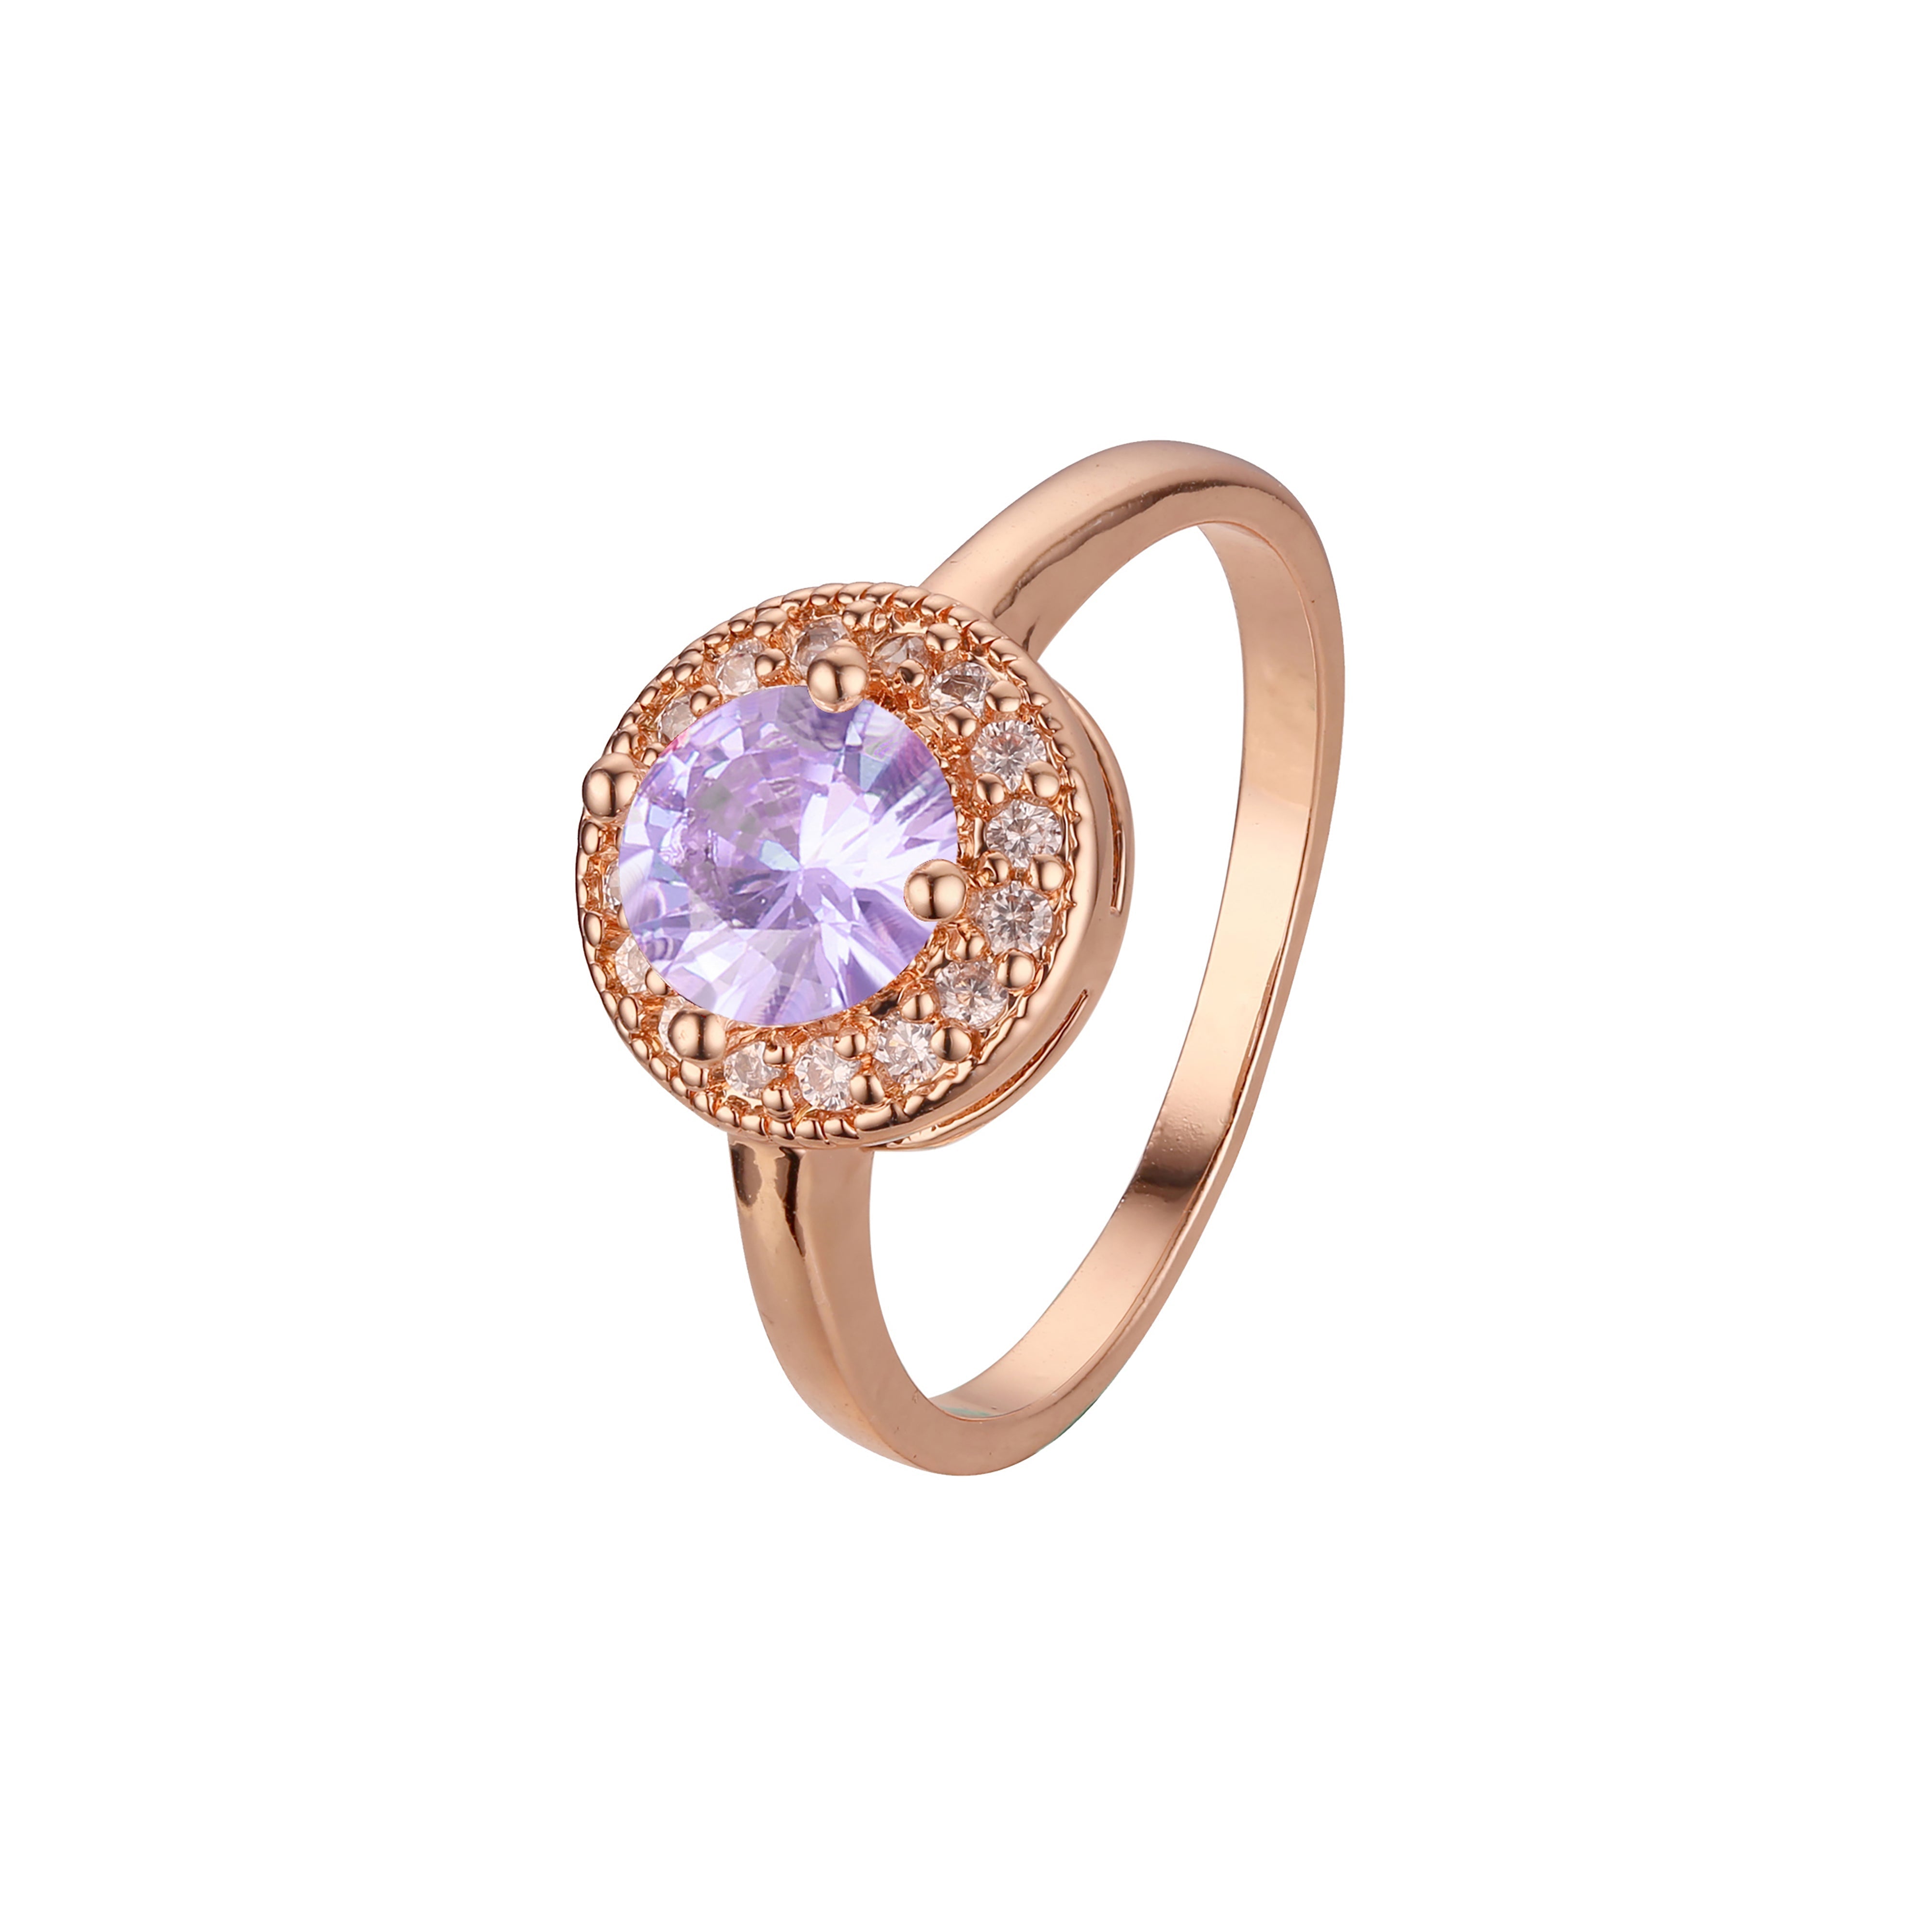 Chic colorful cubic zirconia Rose Gold halo rings